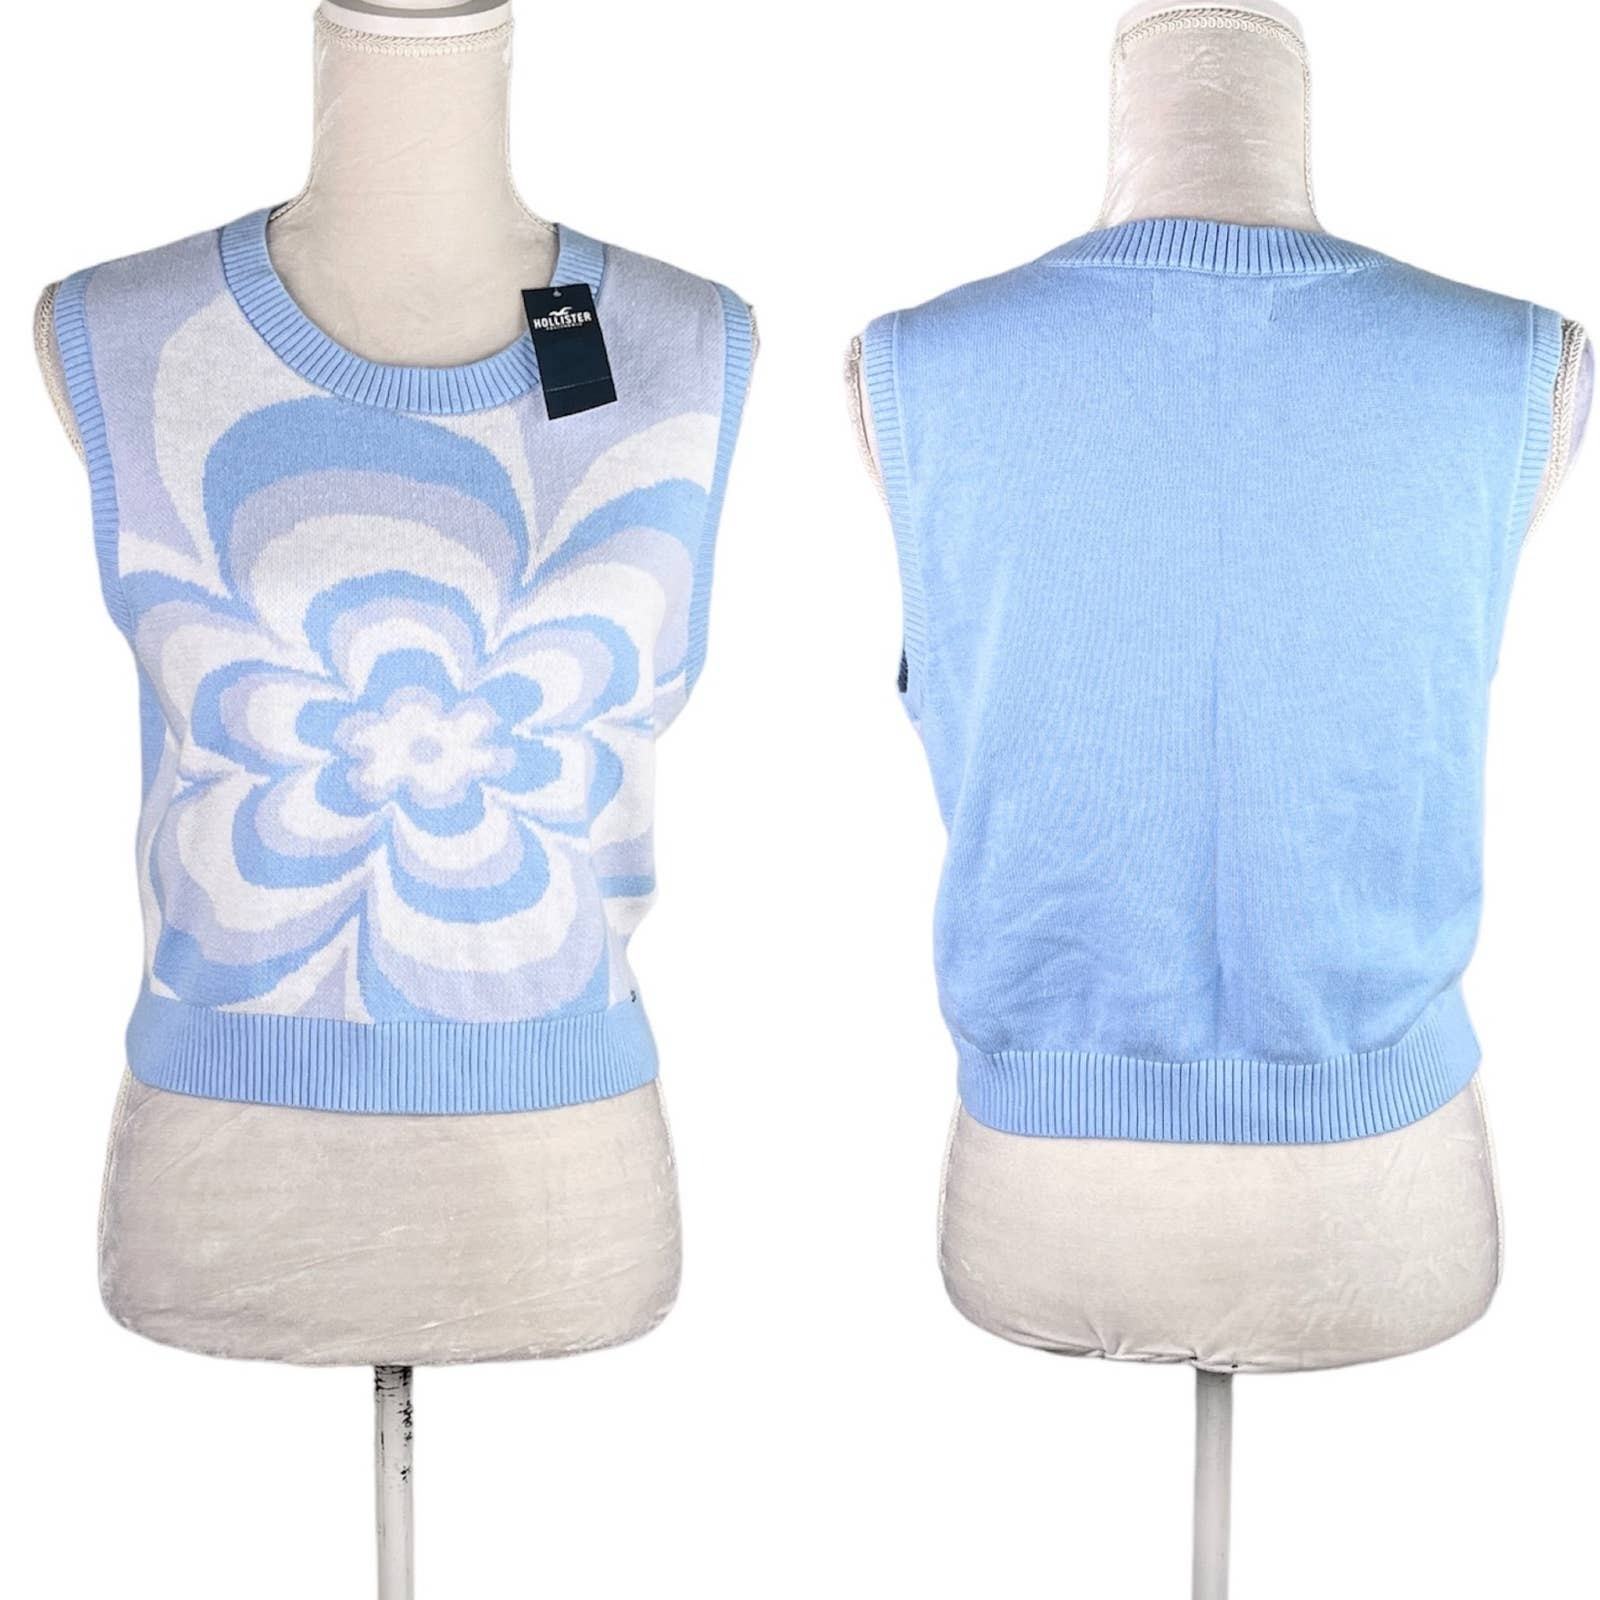 Primary image for Hollister Sweater Vest Large Baby Blue White Flower New